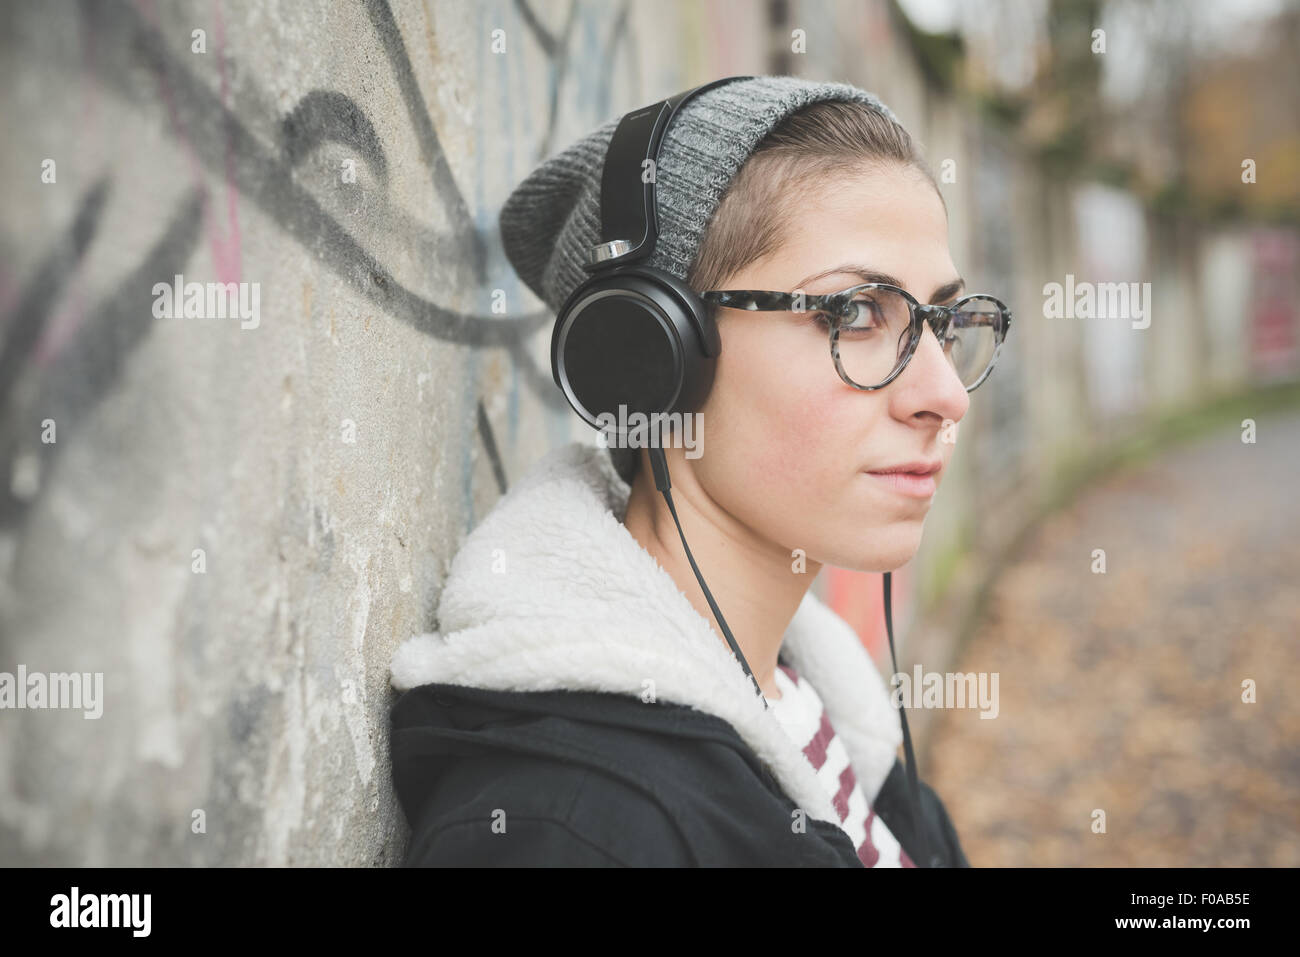 Teenager with headphones by graffiti wall Stock Photo